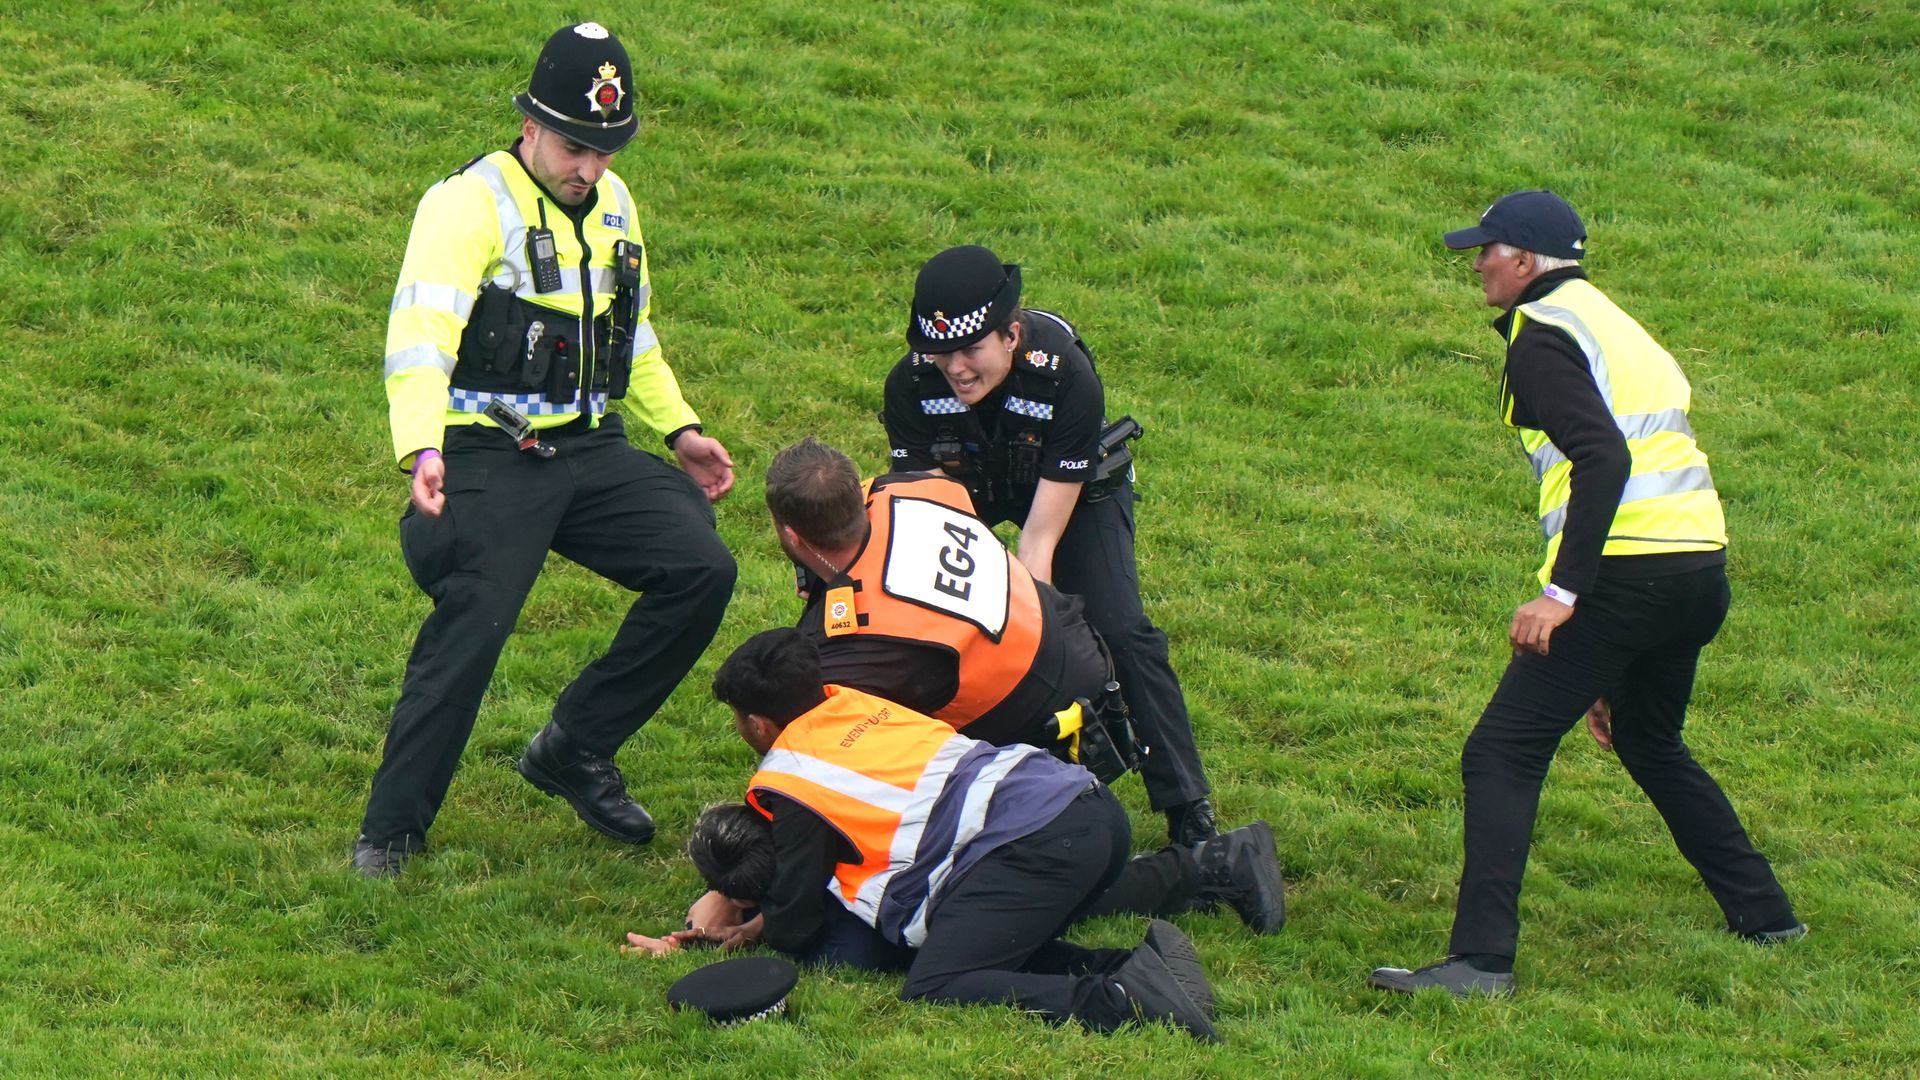 Two protesters arrested for attempt to disrupt Derby at Epsom